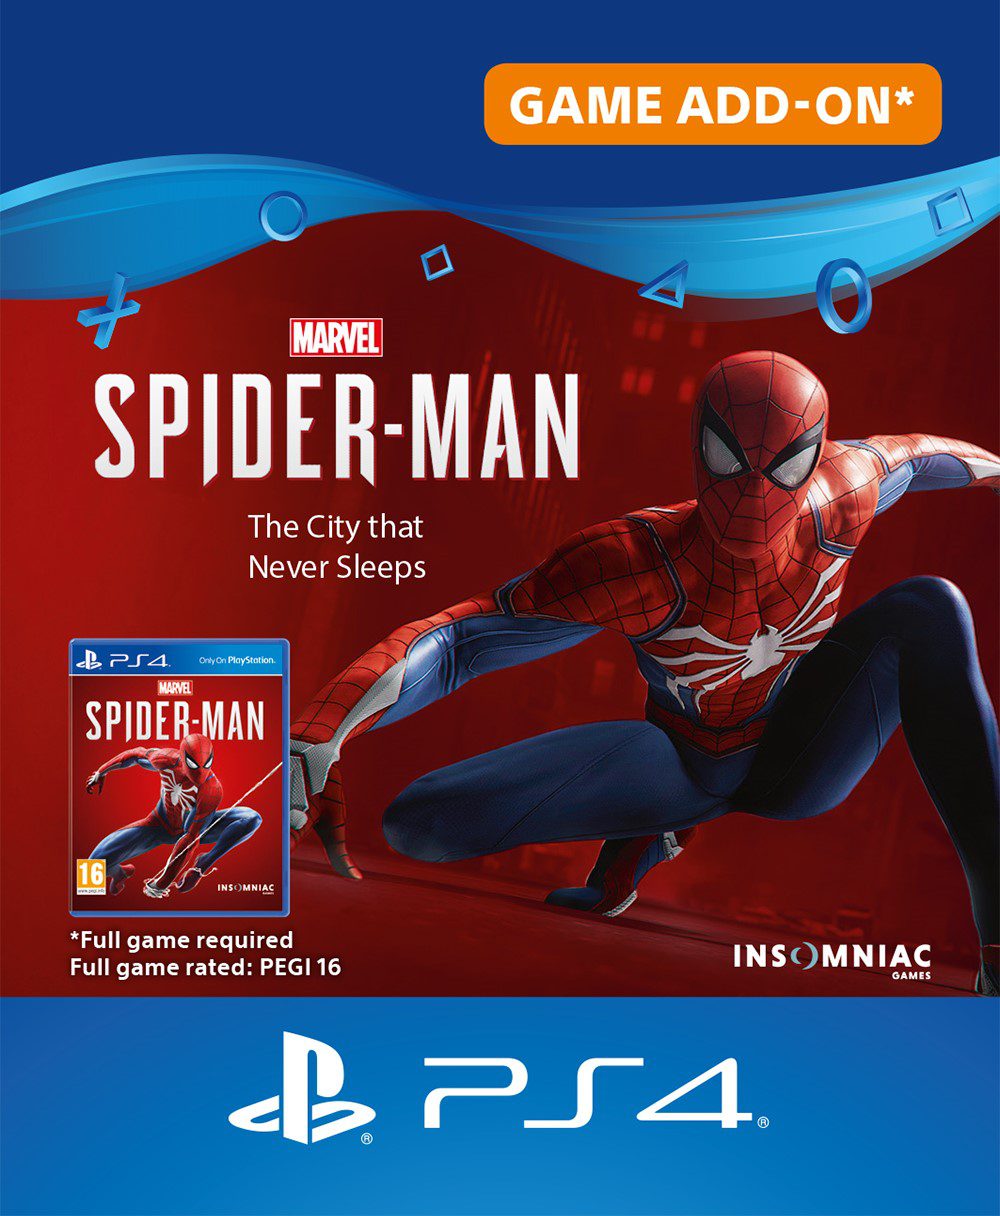 Marvel’s SpiderMan Game of the Year-The City that Never Sleeps PS4 DLC Digital Voucher Code. (Email Delivery within 1 Hr)